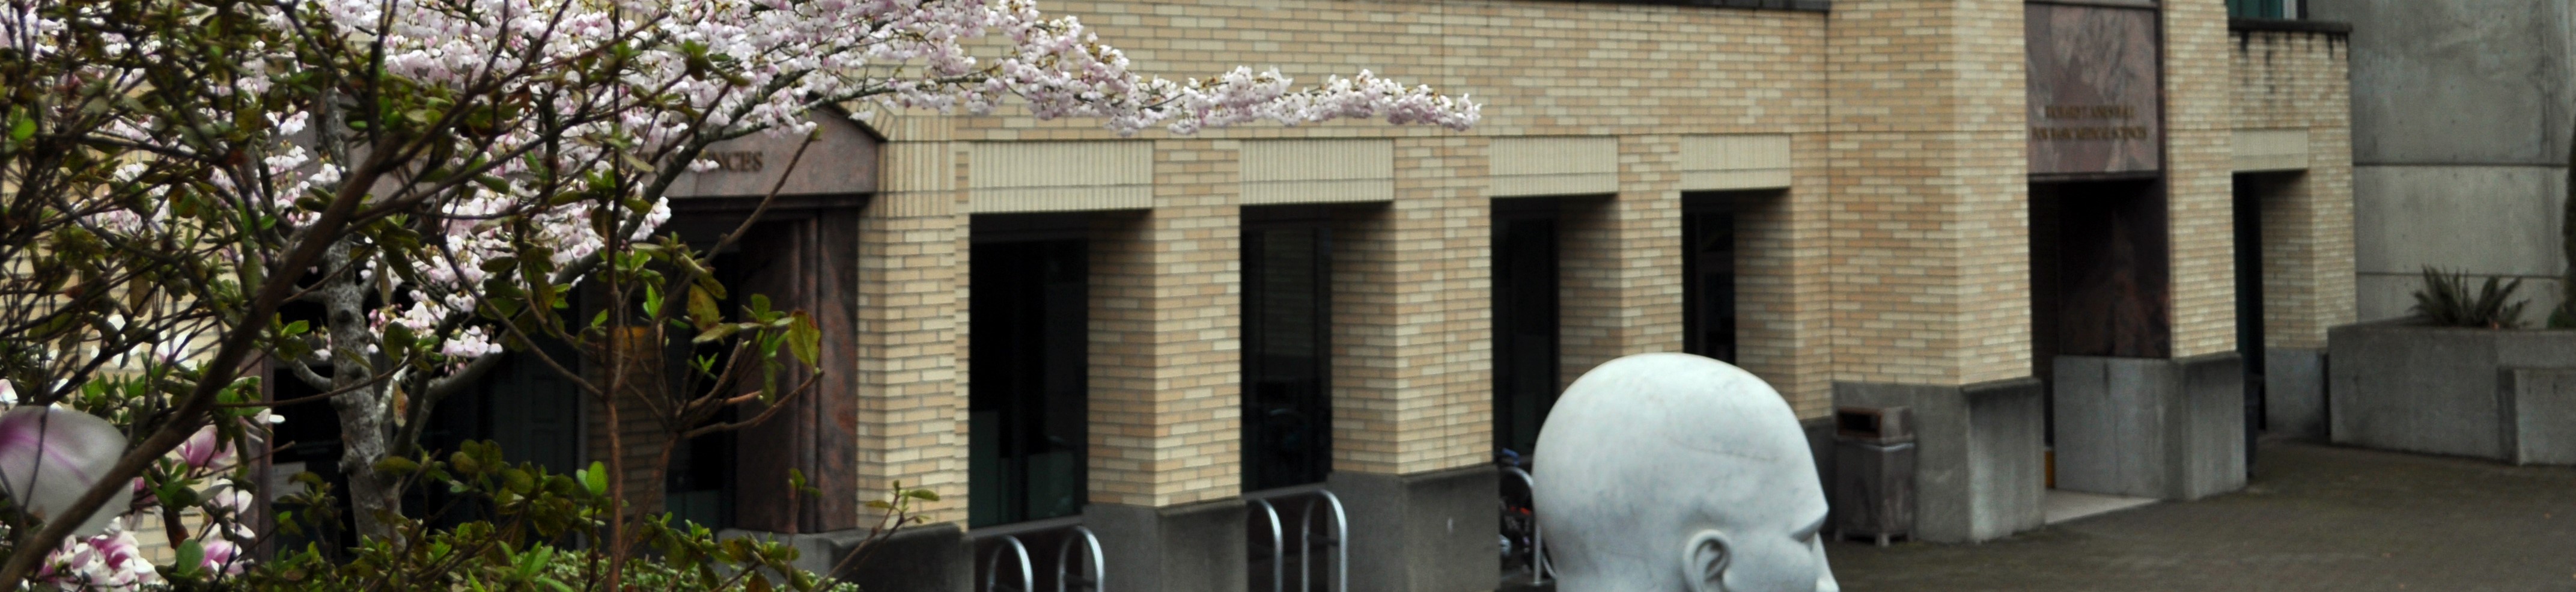 exterior RJH building with a blooming cherry tree and top of big head statute.